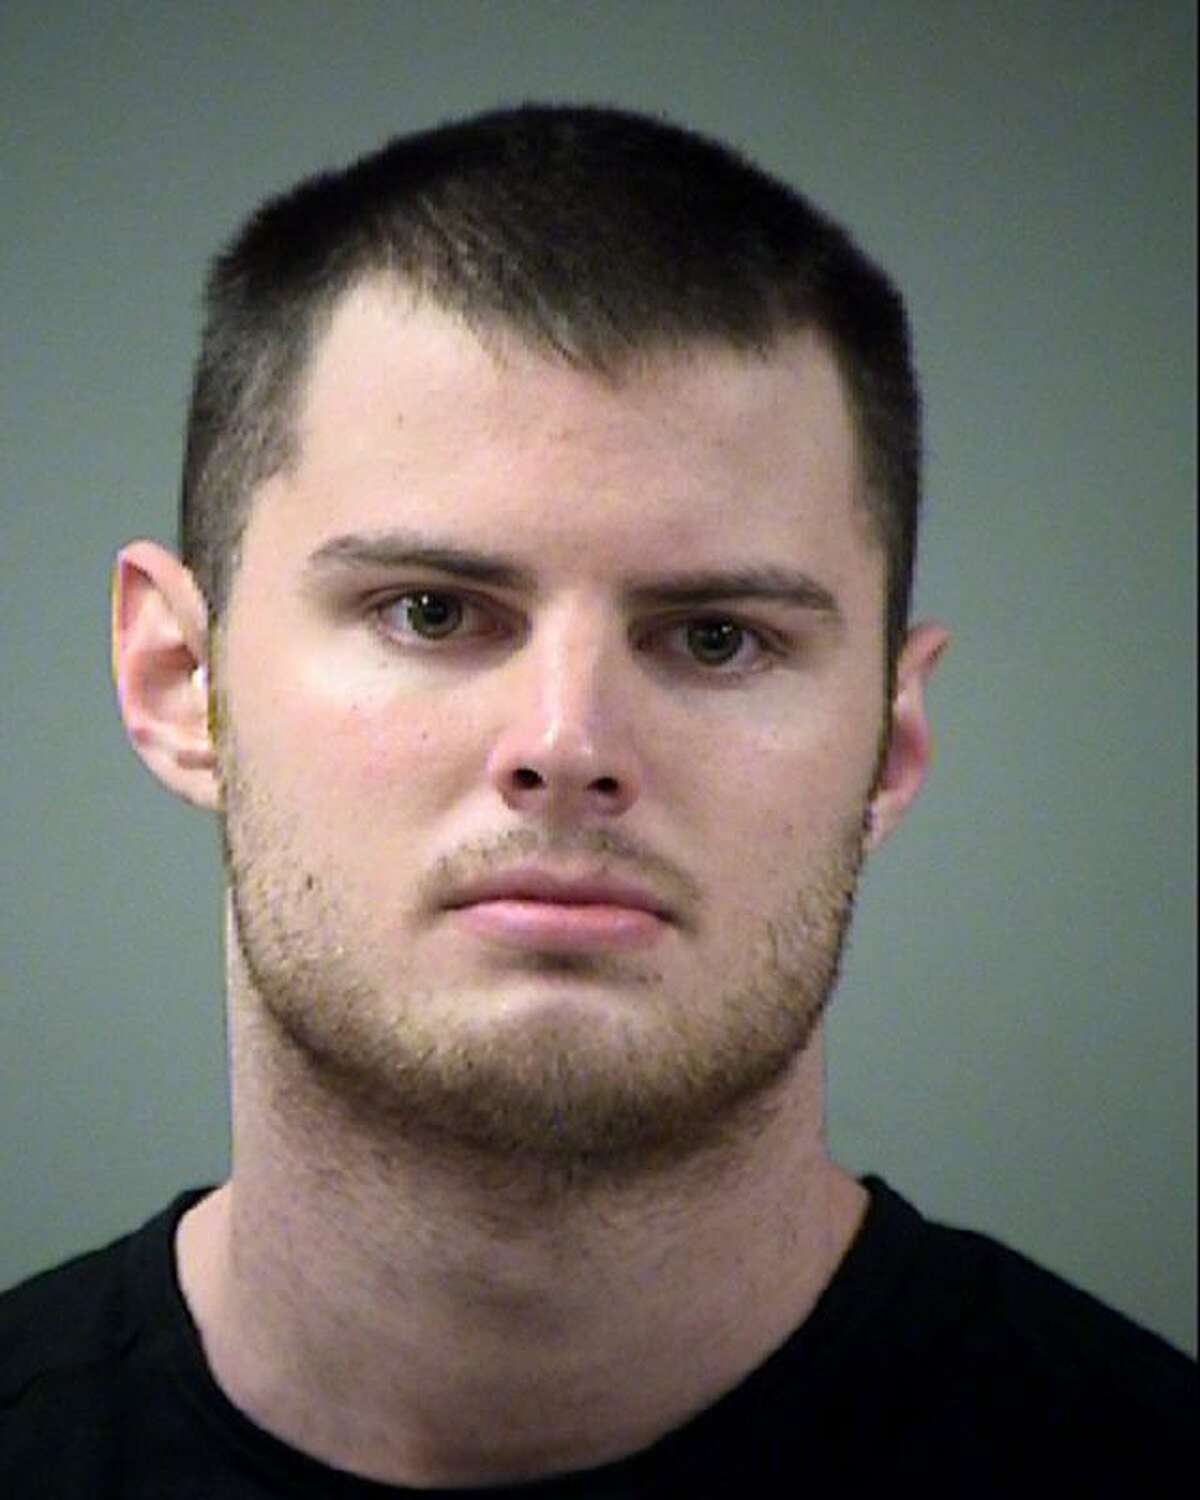 Mark Howerton, 22, was charged in connection with the death of Trinity University cheerleader Cayley Mandadi. He turned himself in to authorities and was released on bond at 1 a.m. at the Bexar County Magistrate's Office. Bail had been set at $225,000.